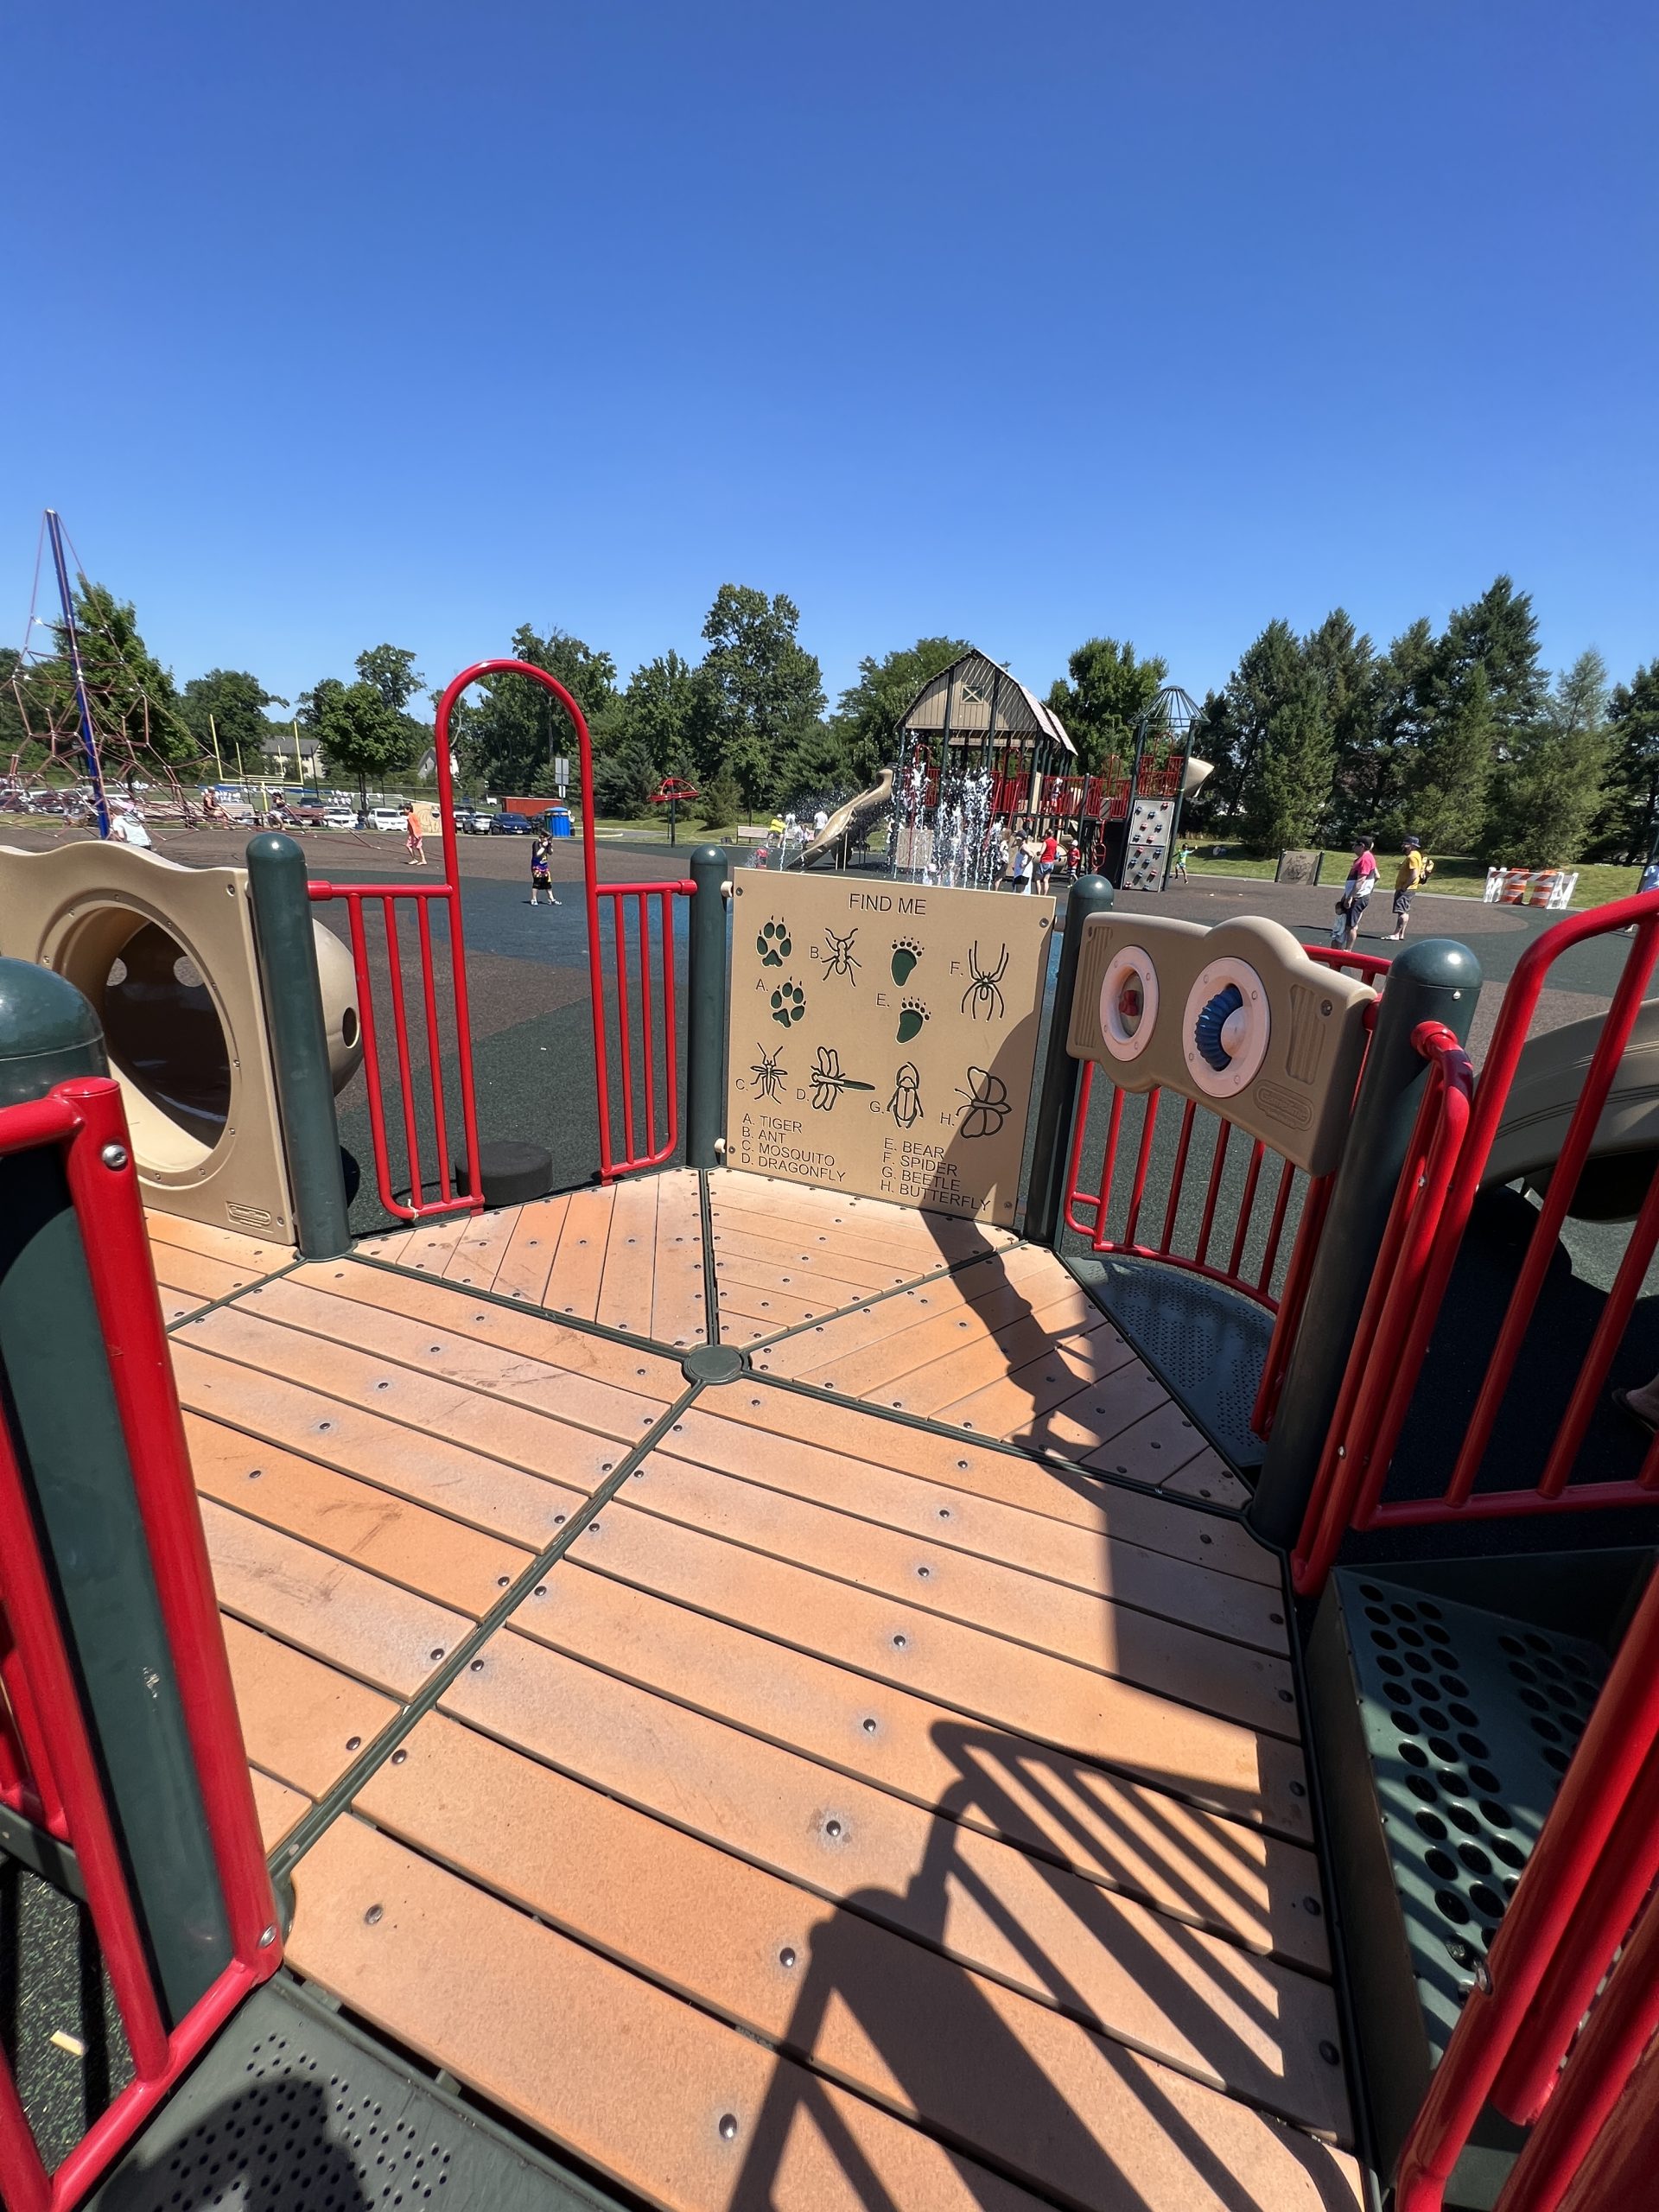 Ponderosa Farm Park Playground general store in Scotch Plains NJ wheelchair accessible sensory play areas